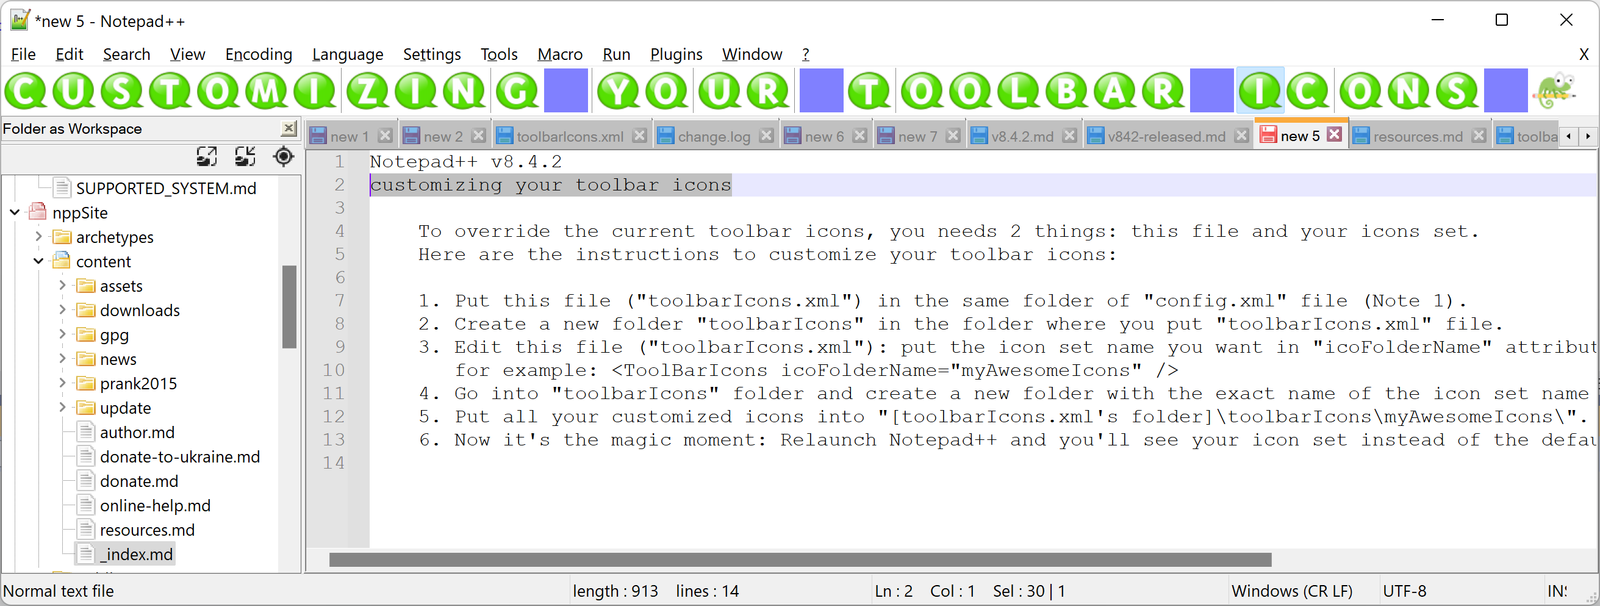 download the new Notepad++ 8.5.7